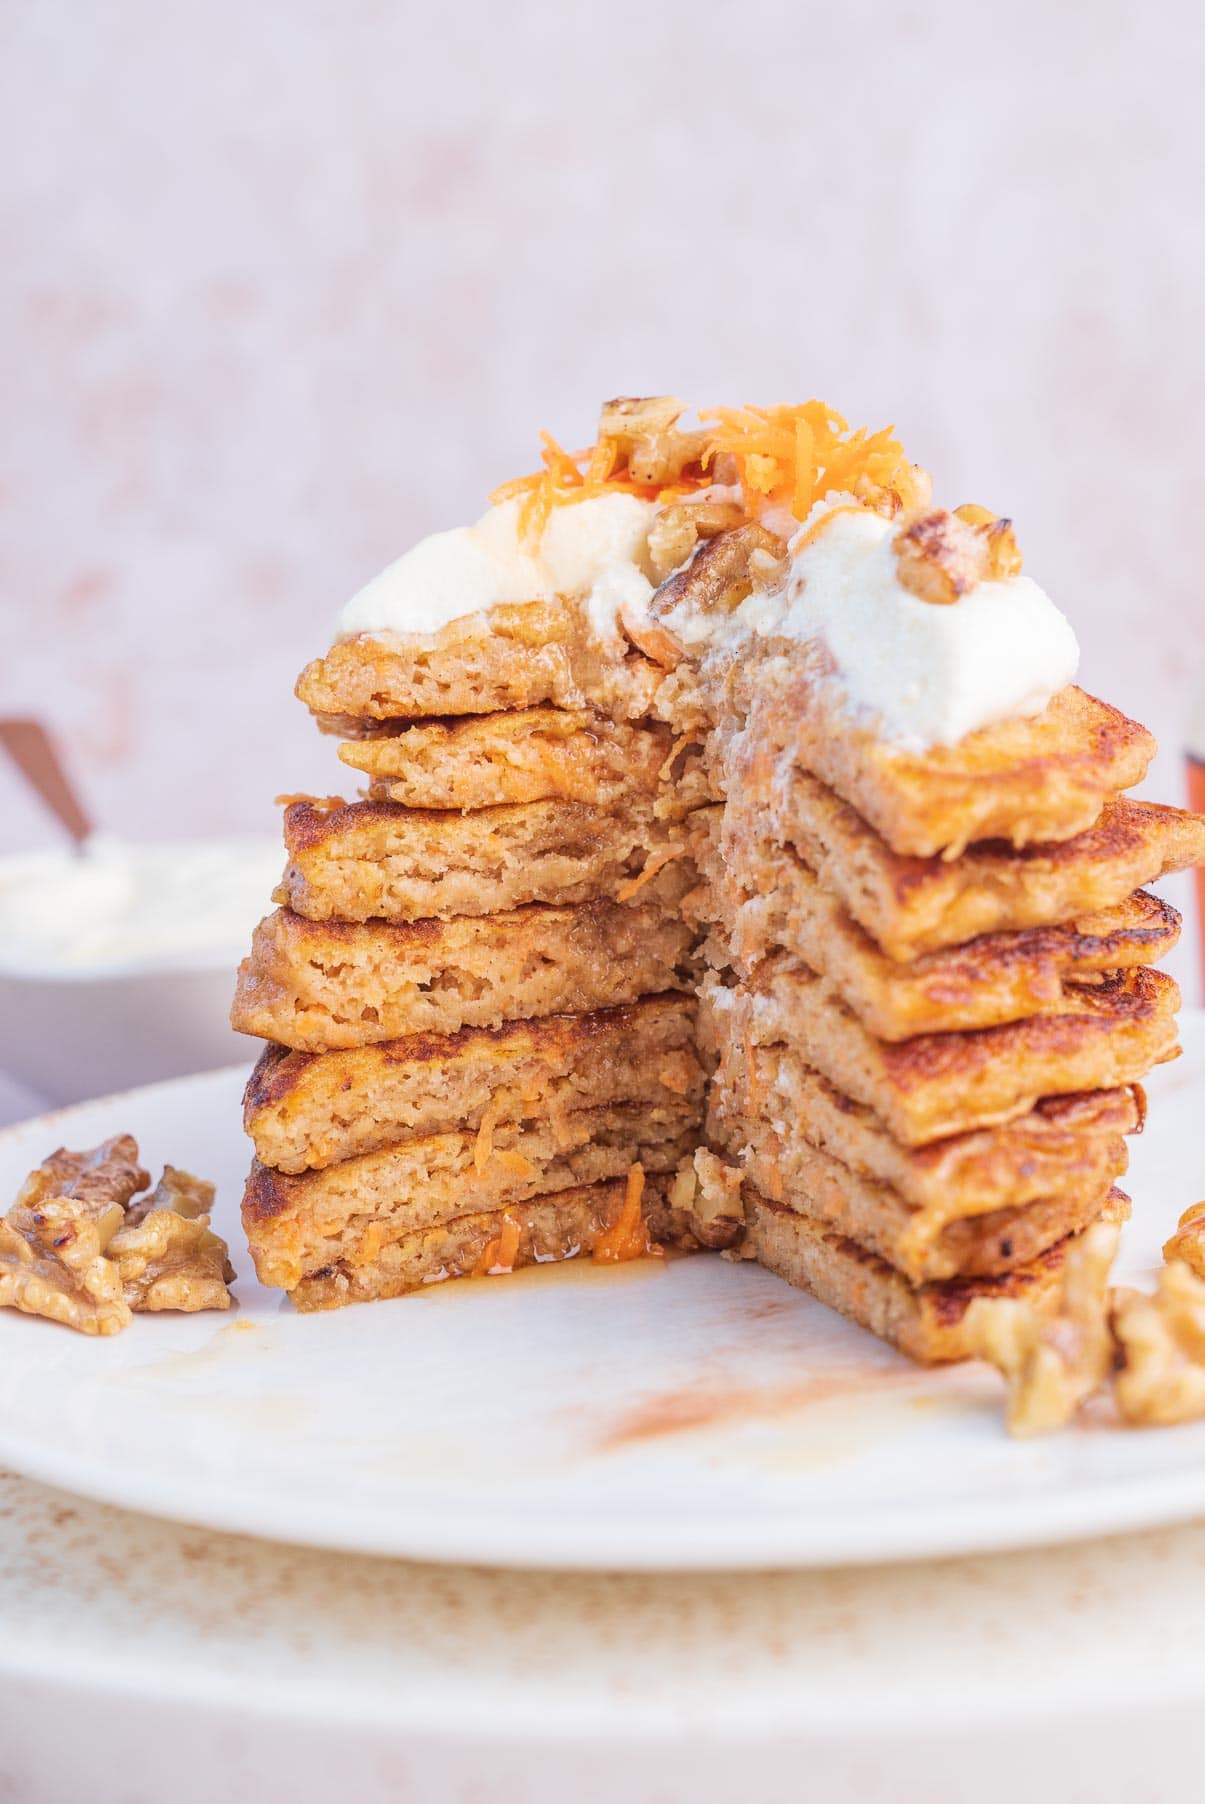 A stack of carrot cake pancakes with a part missing on a white plate topped with cream cheese topping and walnuts.